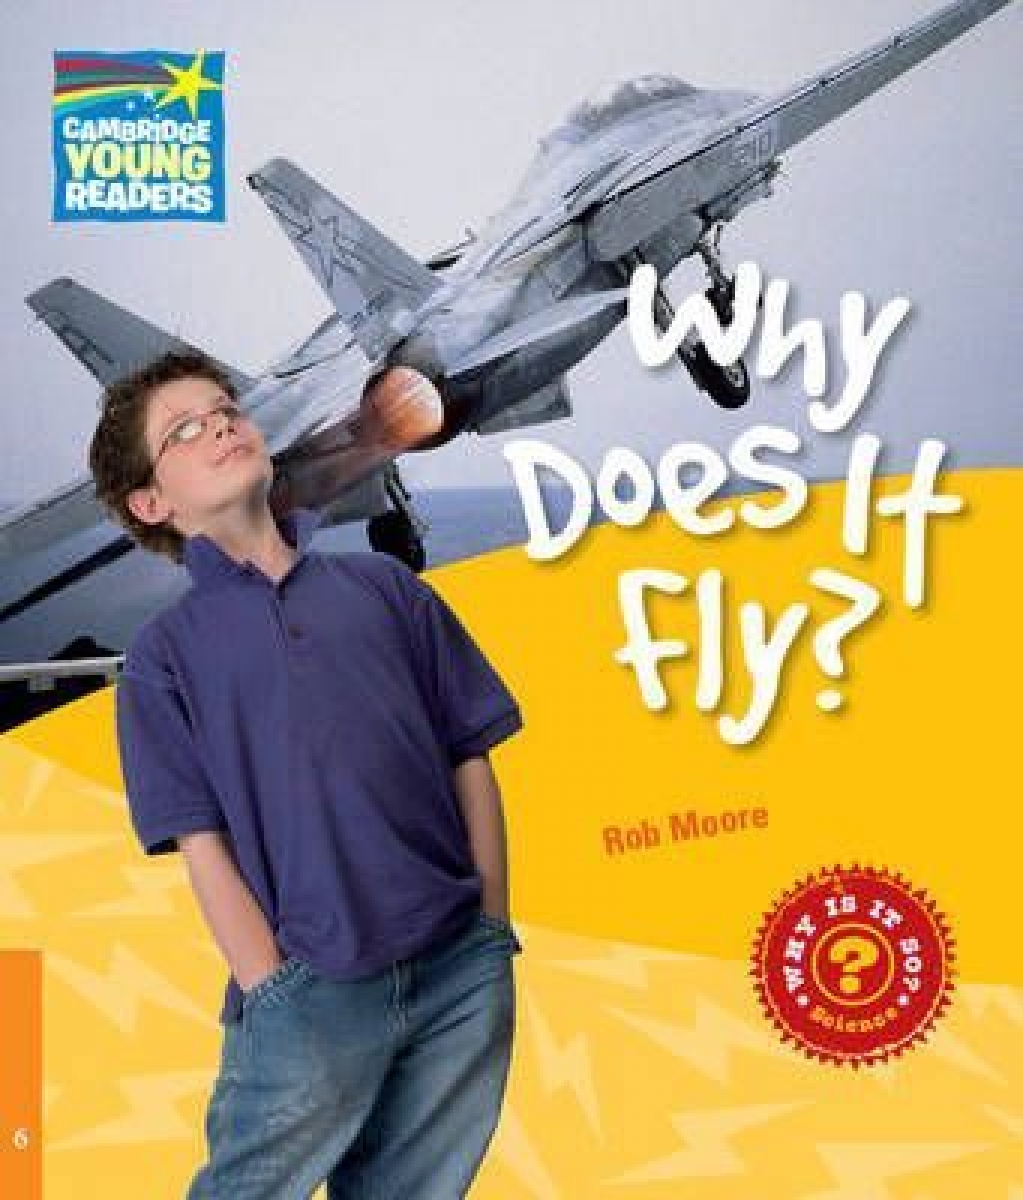 Rob Moore Factbooks: Why is it so? Level 6 Why Does It Fly? 